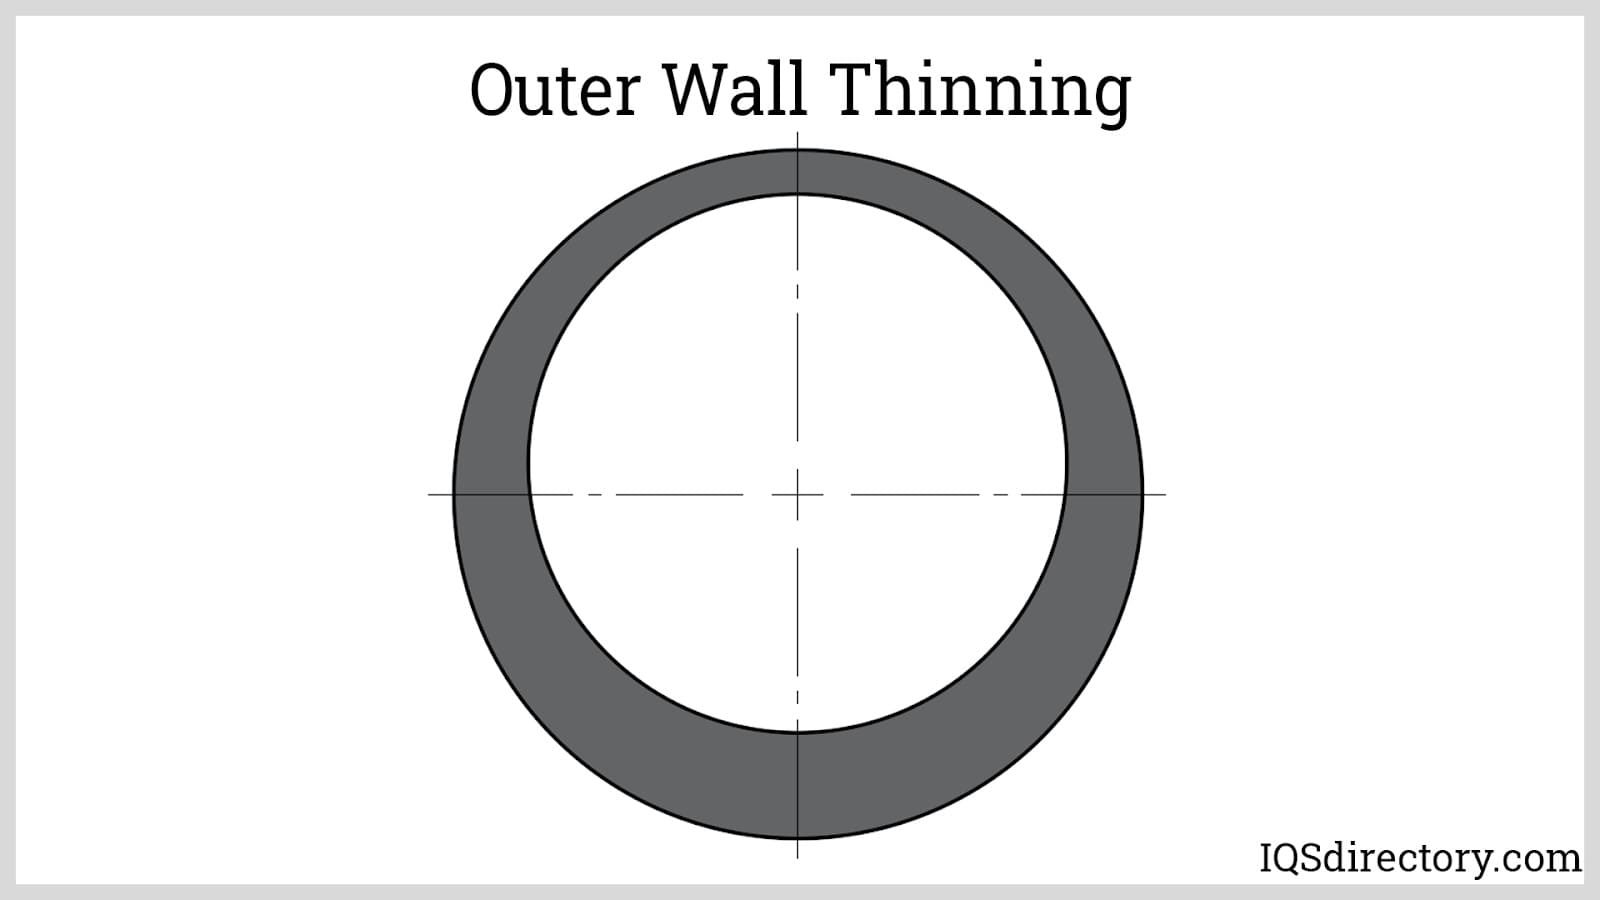 Outer Wall Thinning